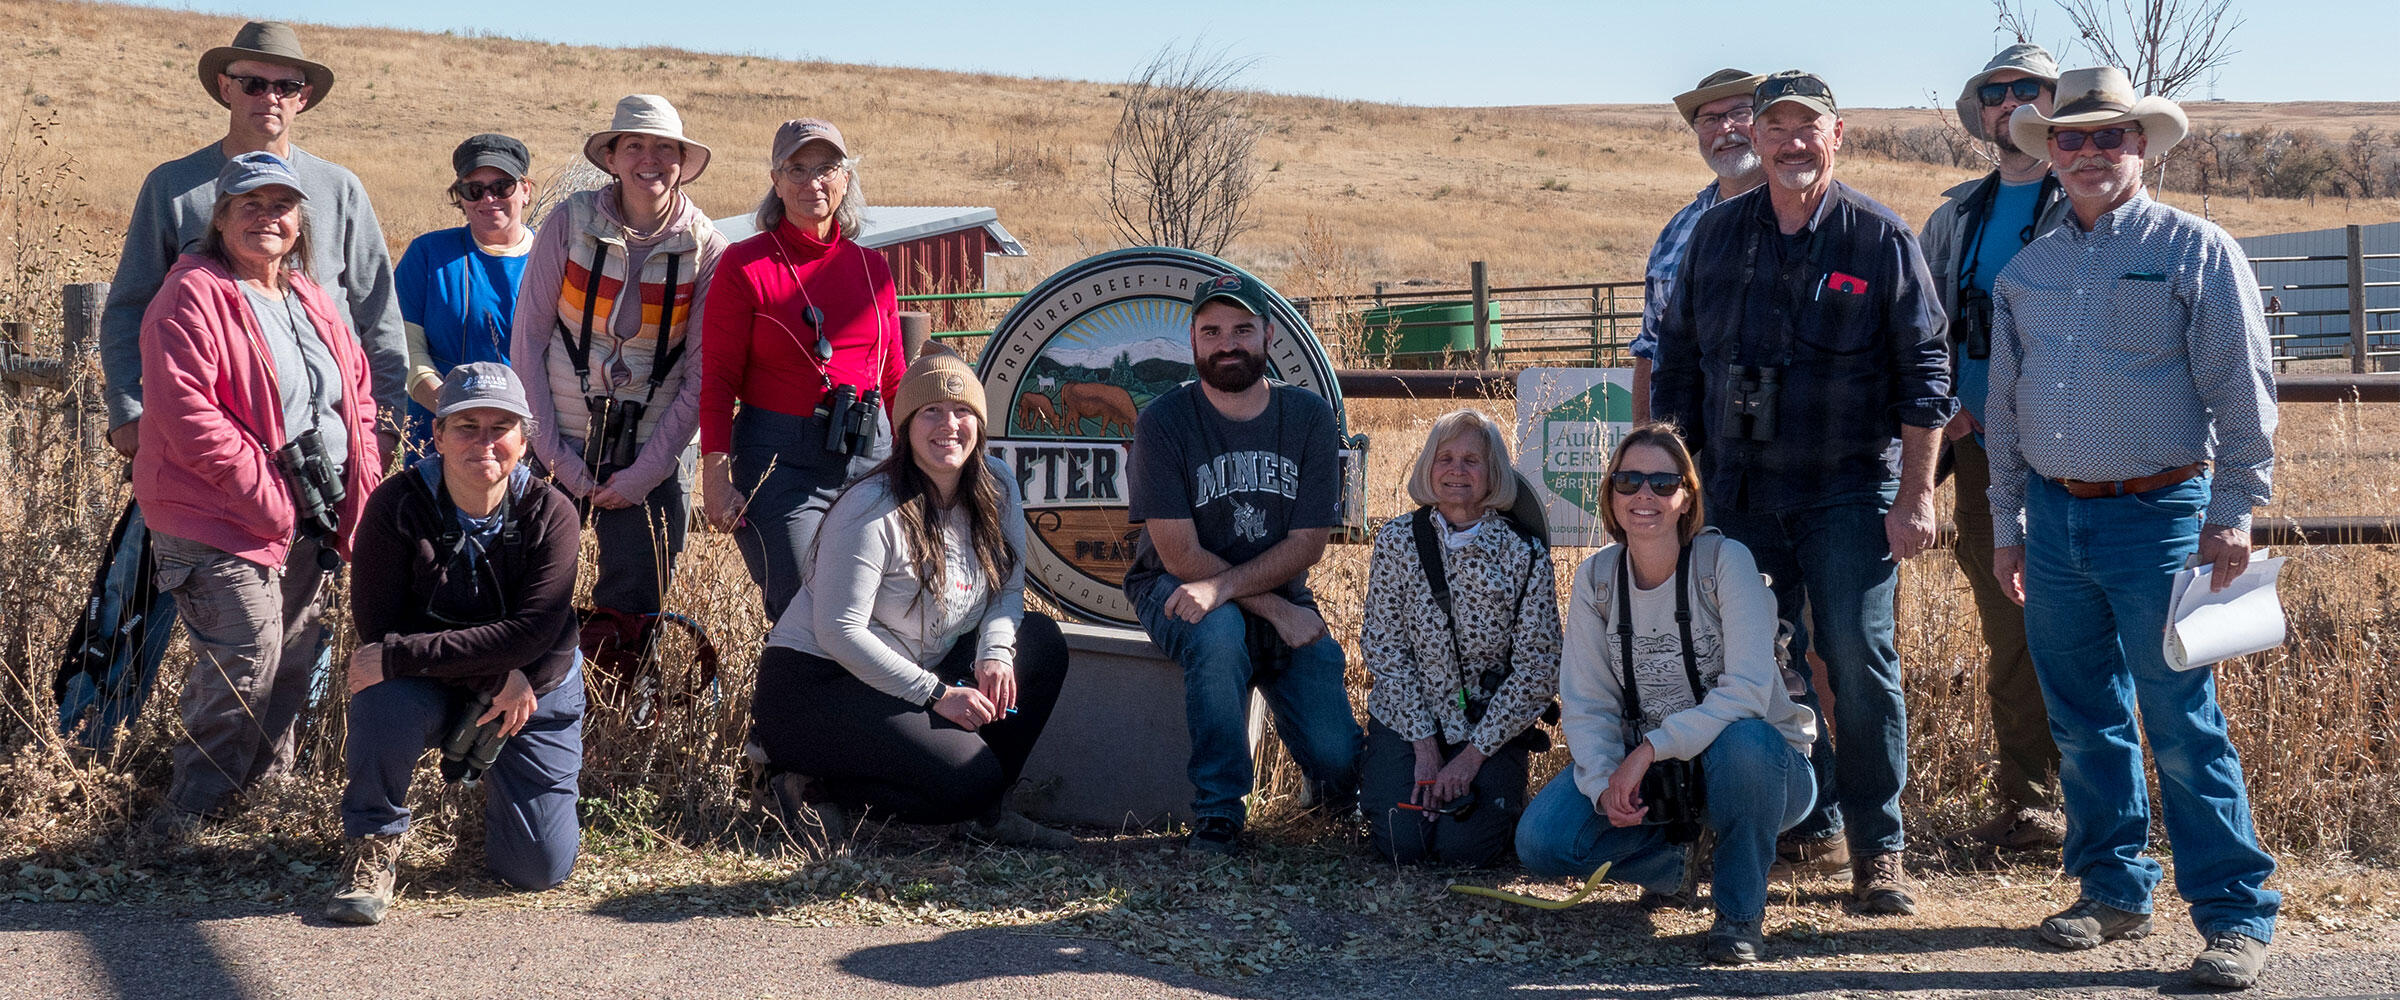 A group of people pose for a photo in front of a sign at Rafter W Ranch.